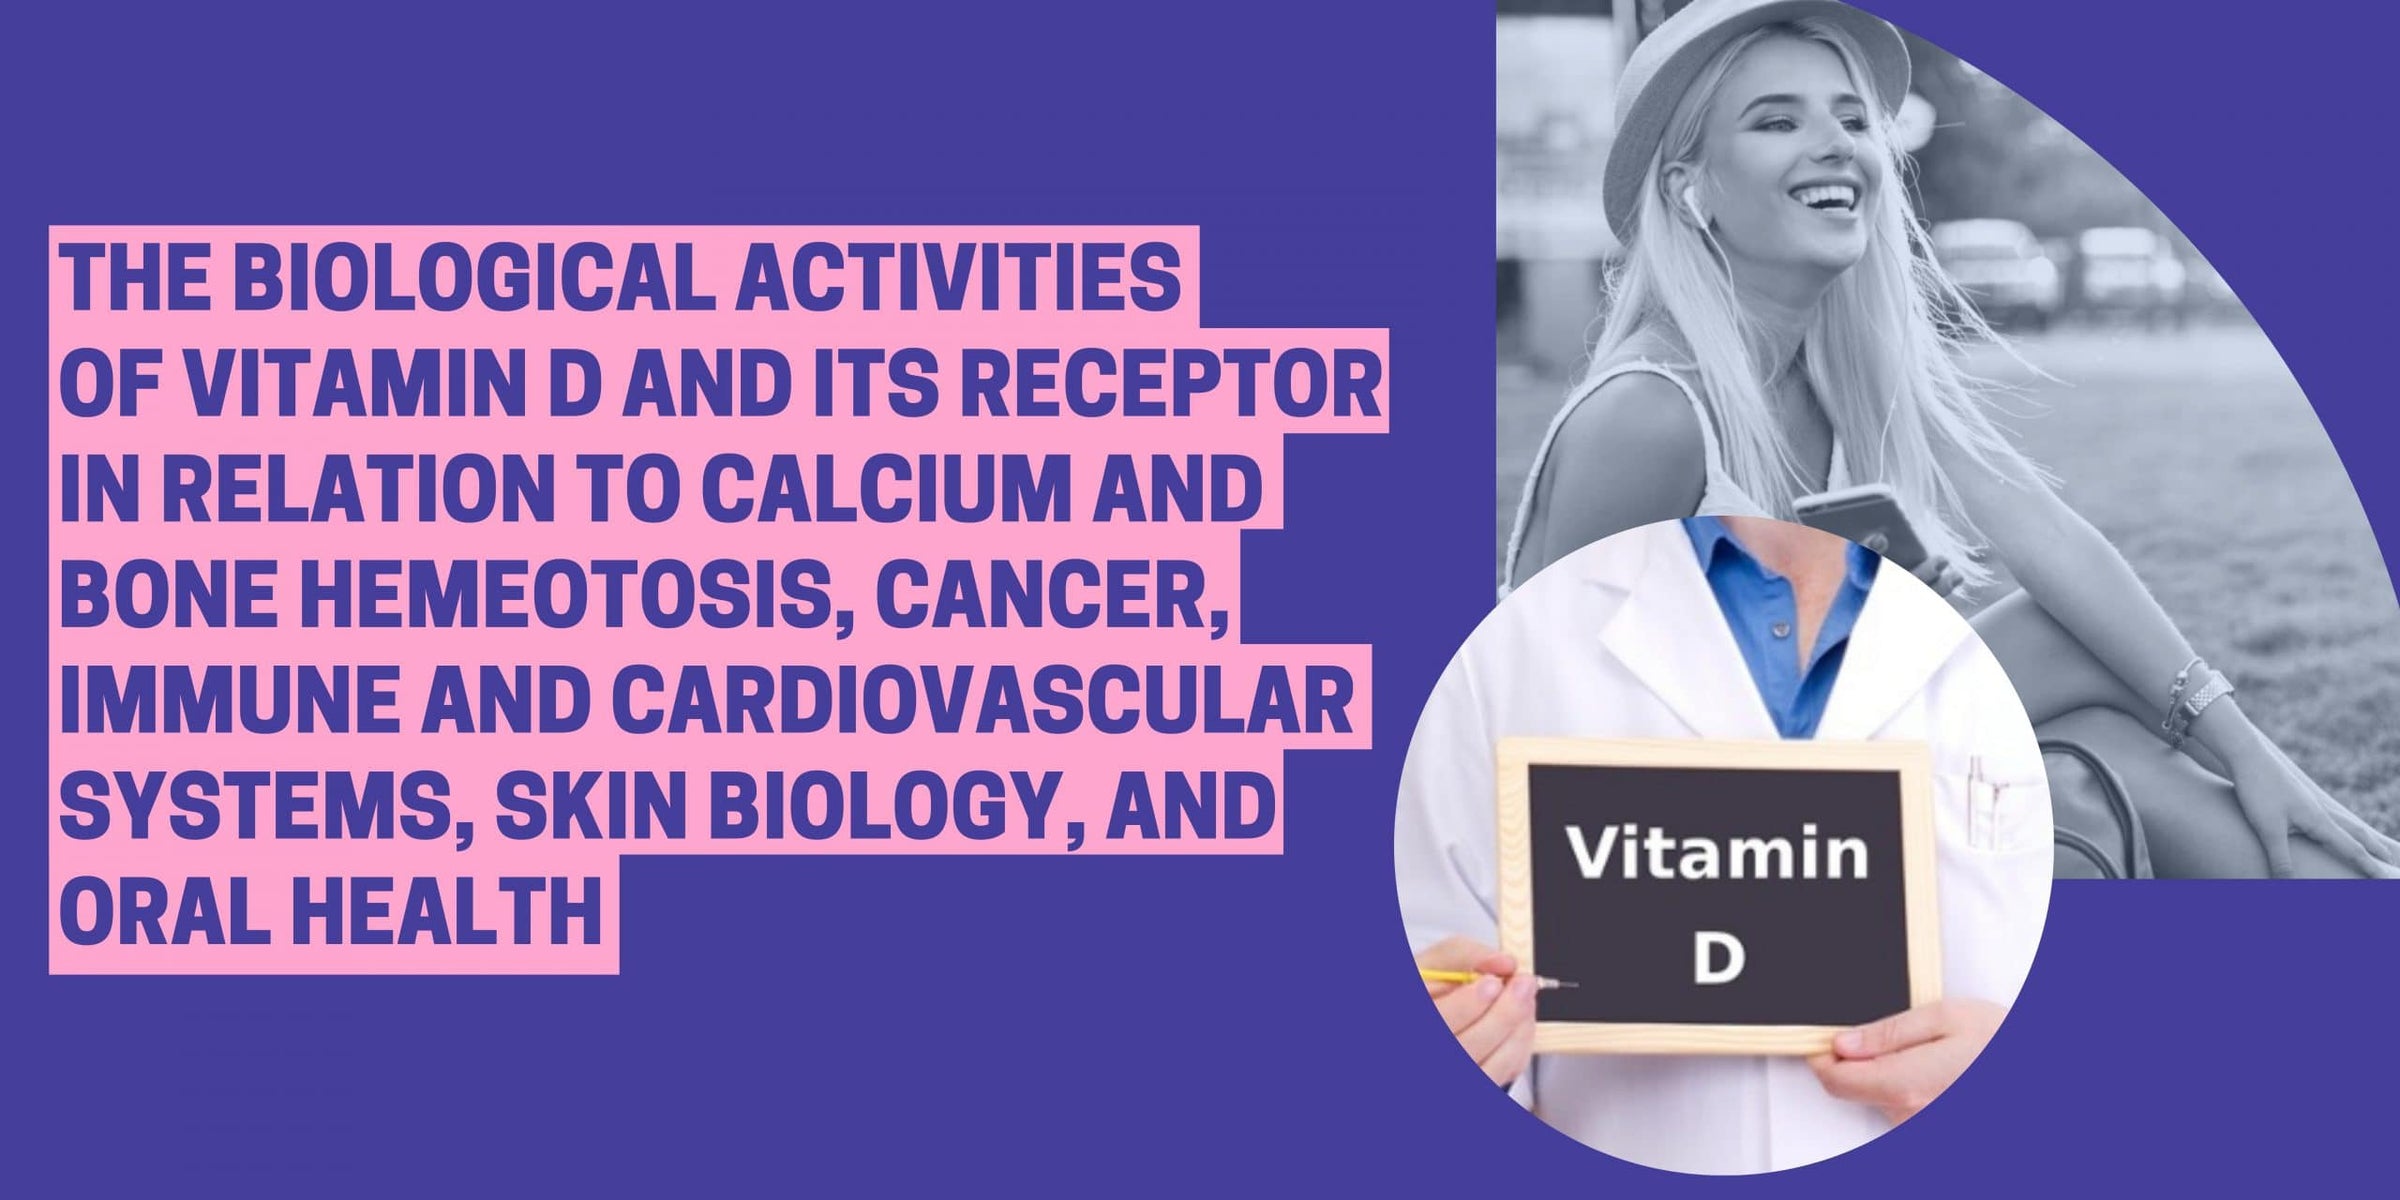 The Biological Activities of Vitamin D and Its Receptor in Relation to Calcium and Bone Homeostasis, Cancer, Immune and Cardiovascular Systems, Skin Biology, and Oral Health Image